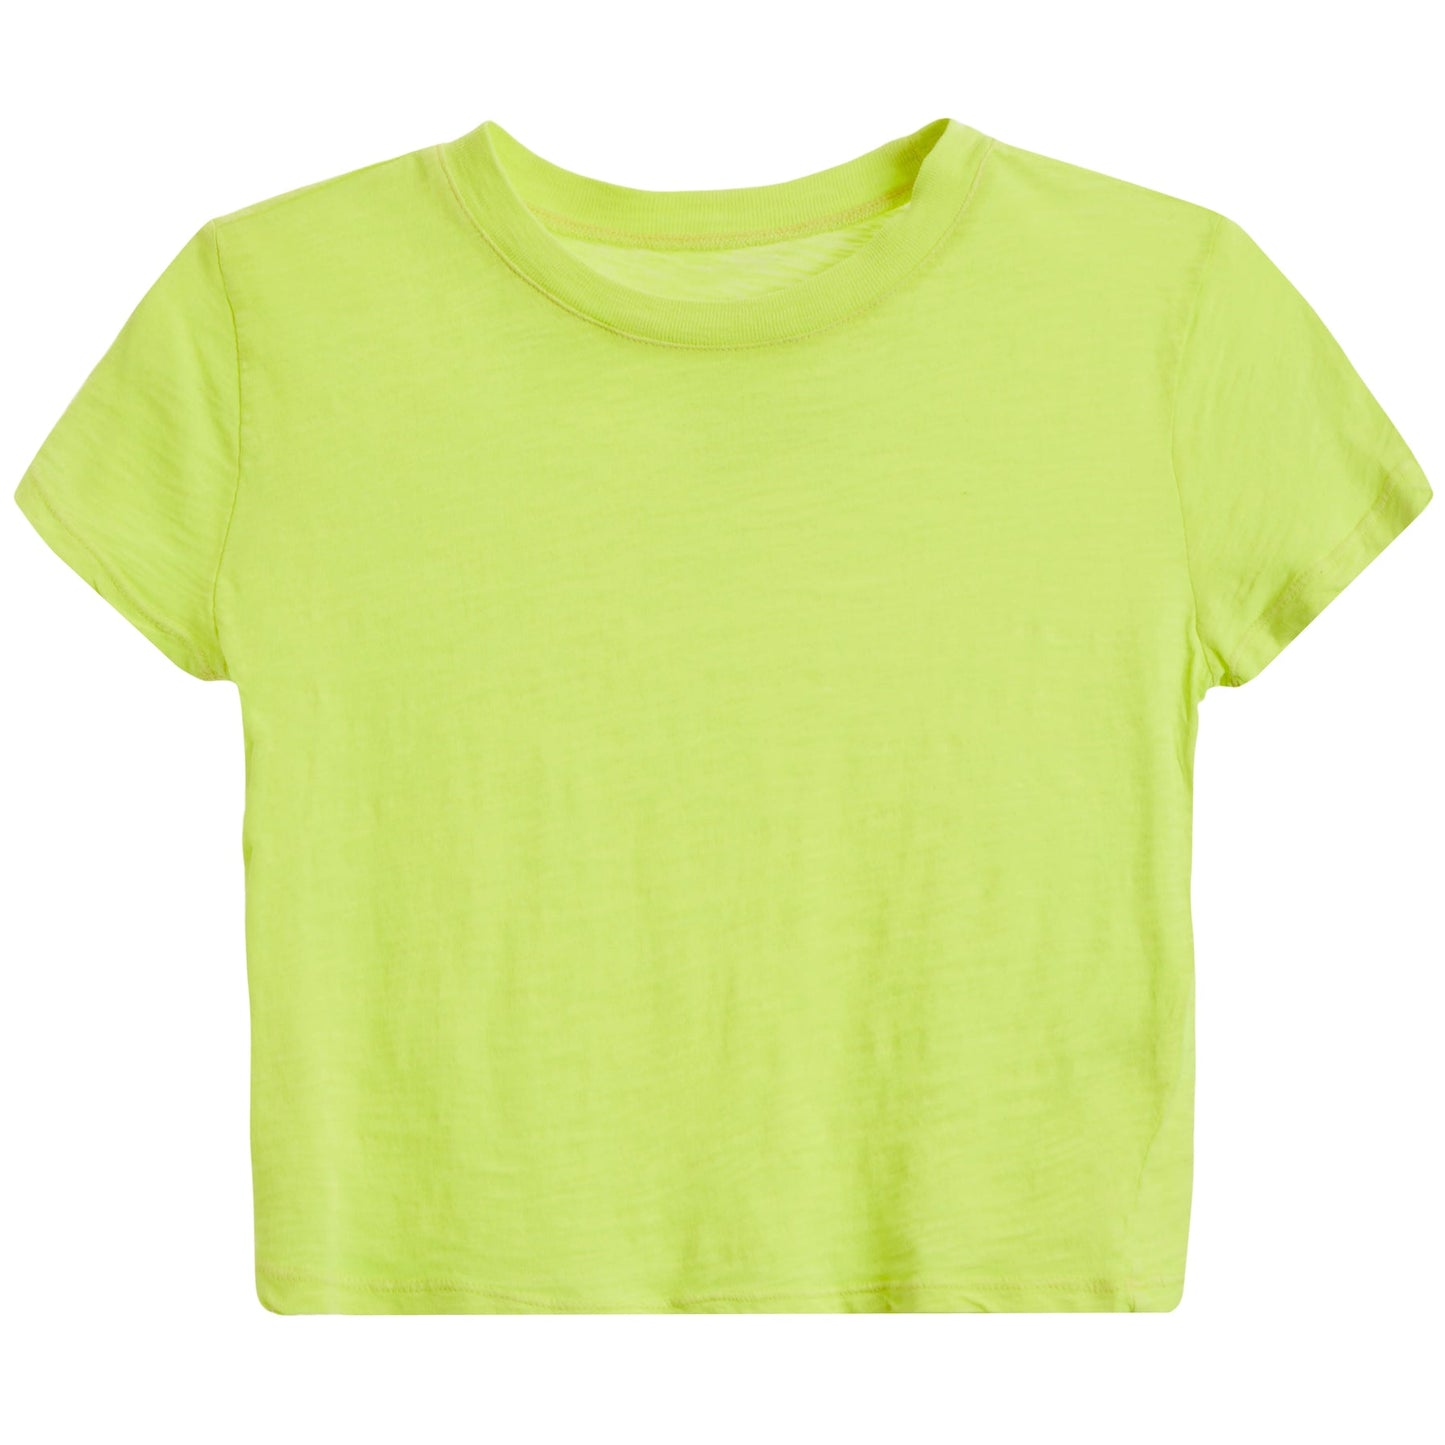 KatieJ NYC - Junior - Limoncello Fearless Crop Tee